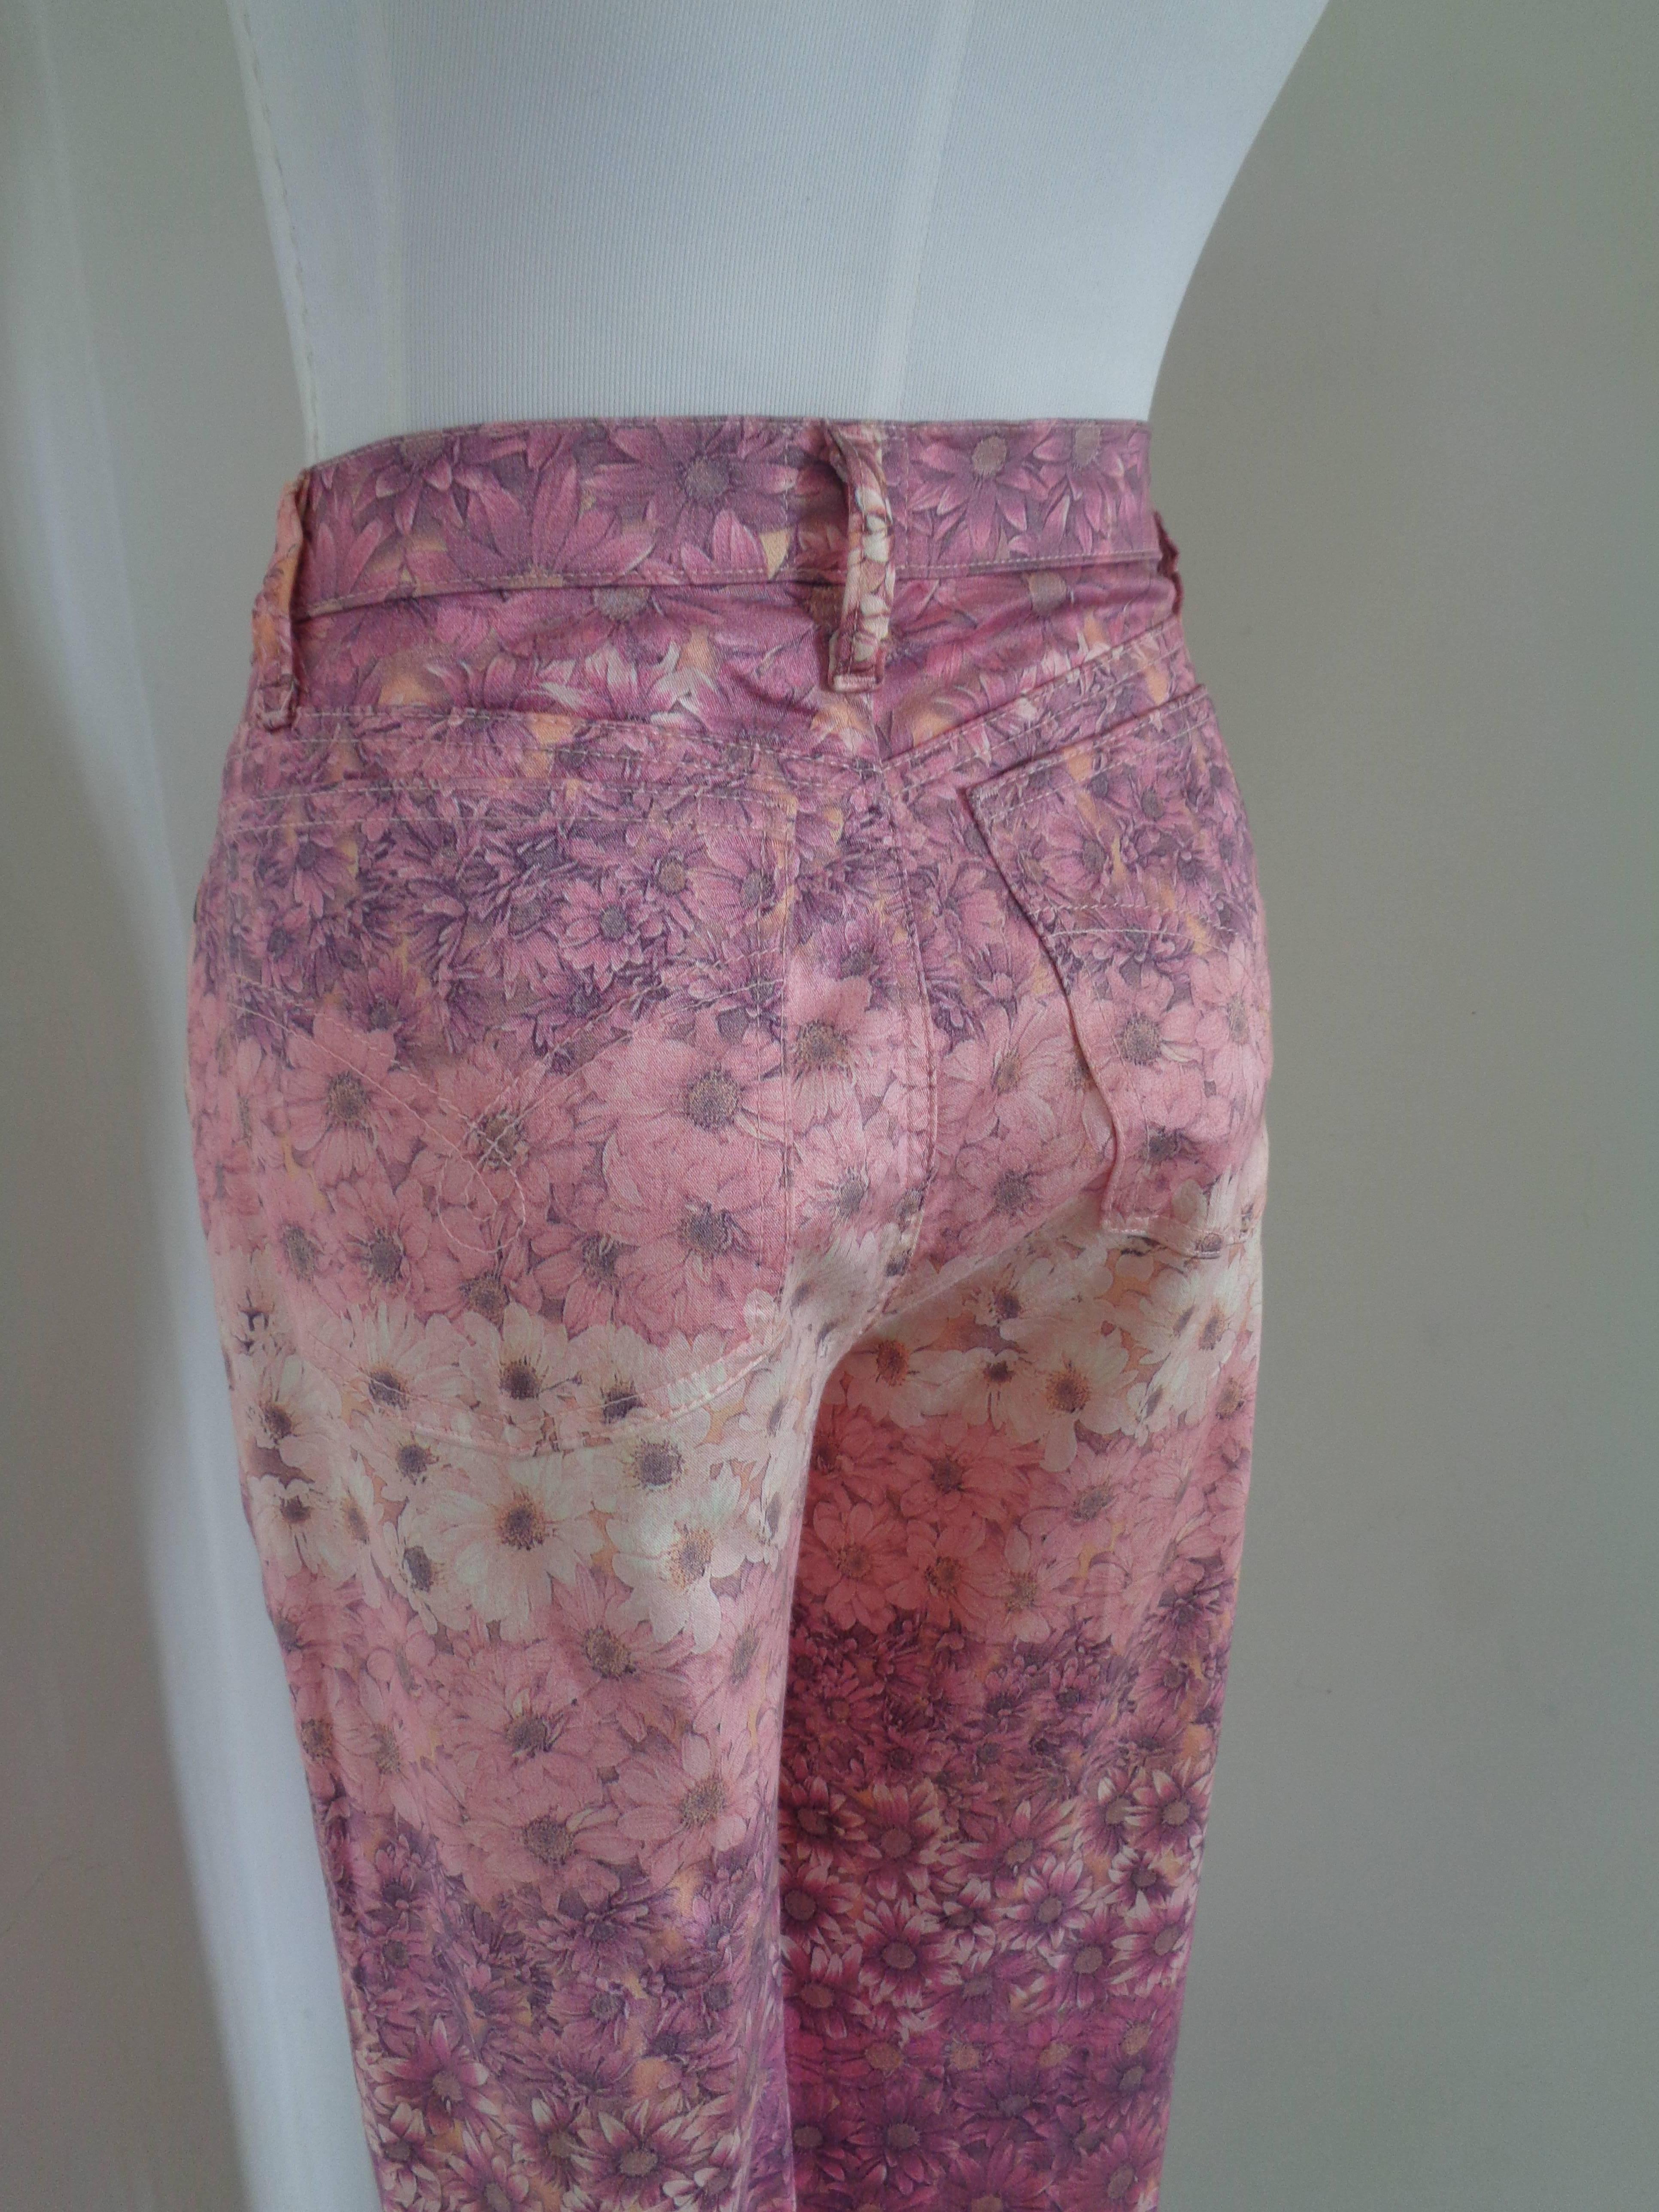 Moschino Pink Flower Cotton Jeans

Moschino pink denim with daysies all over
Totally made in italy in italian size range 42
Composition: Cotton